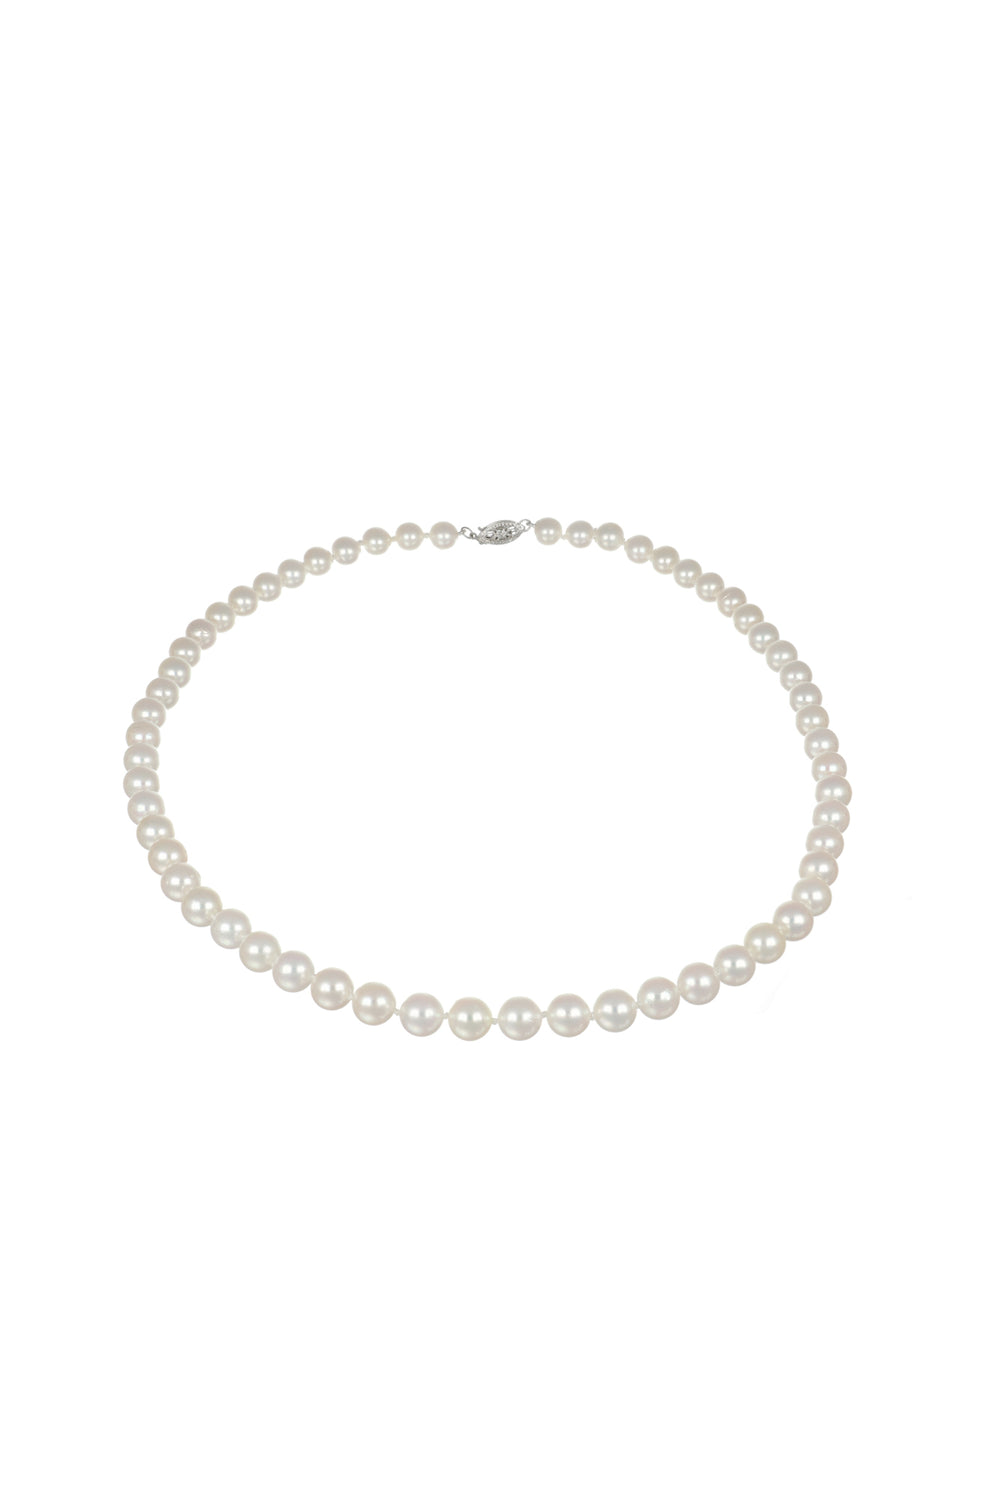 18" Akoya Pearl Necklace